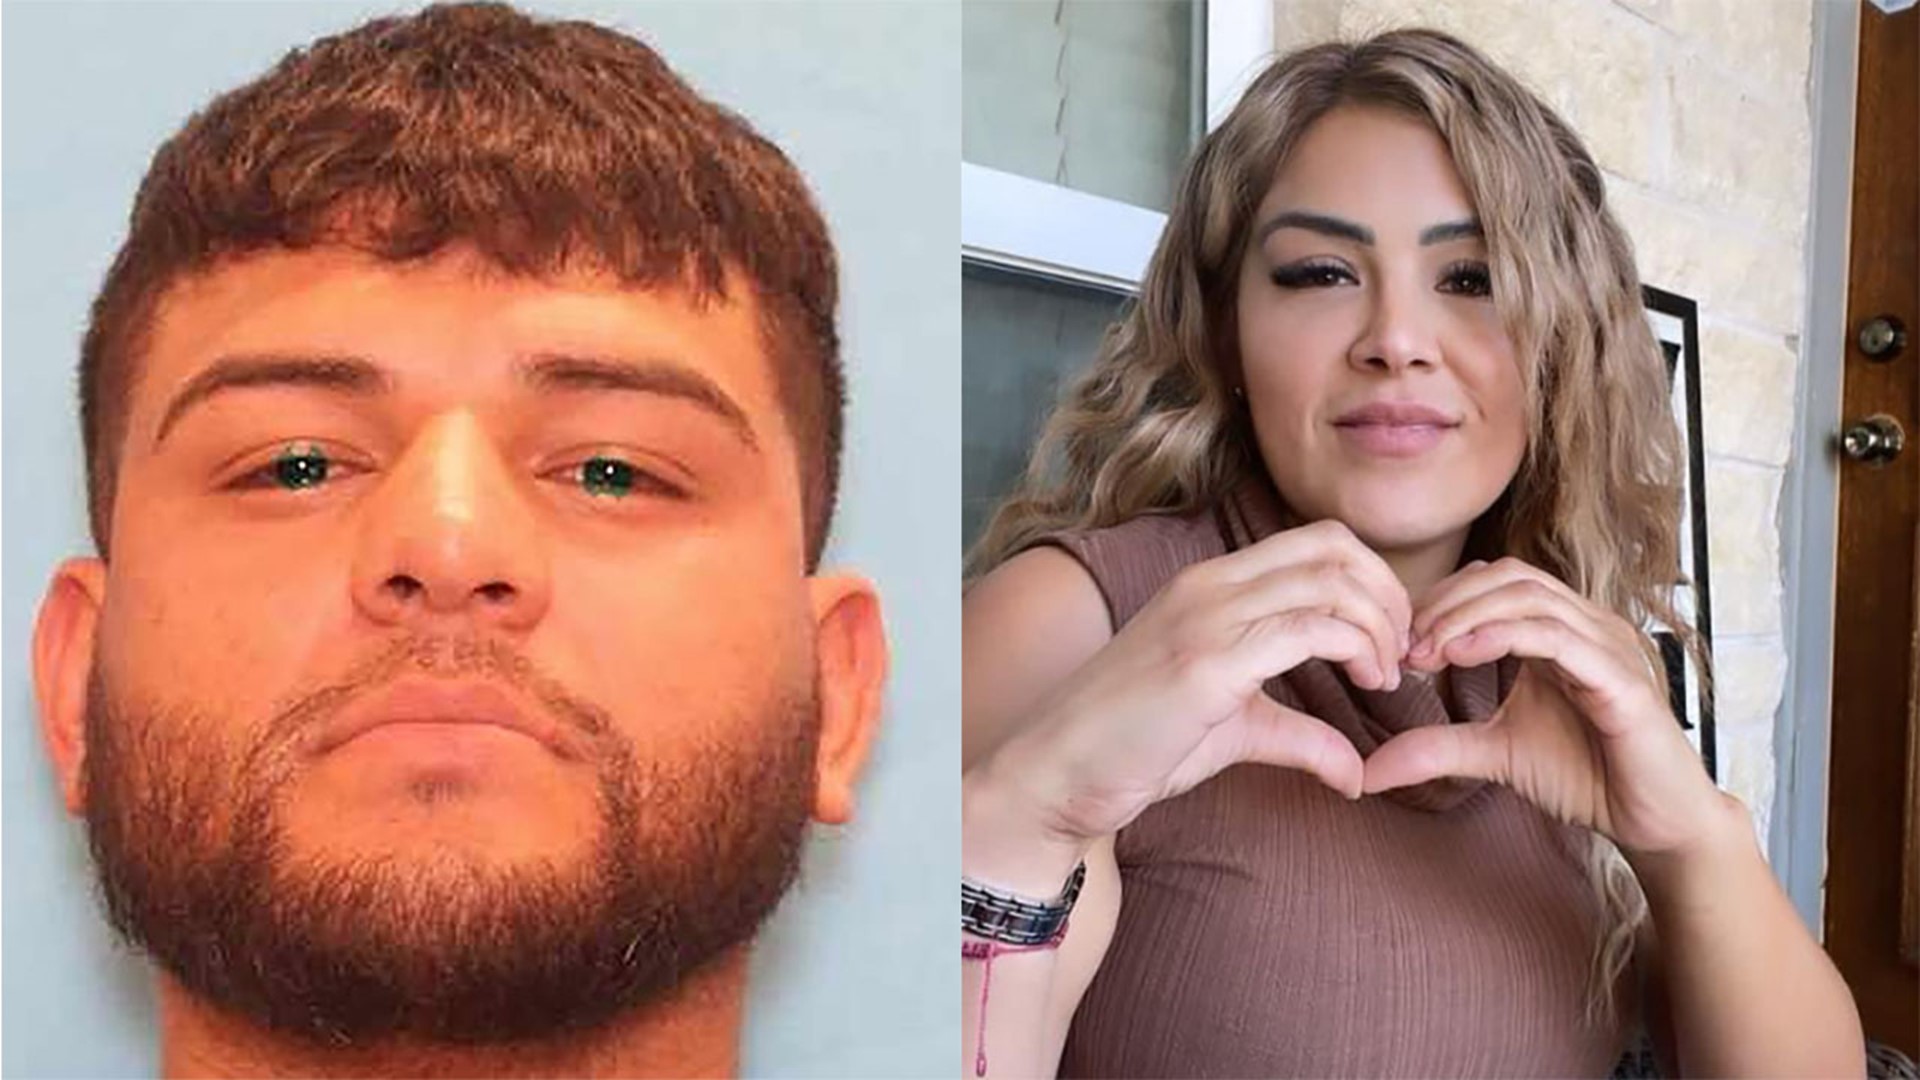 Pasadena police said 30-year-old Daniel Chacon kidnapped his ex-girlfriend, 38-year-old Maira Gutierrez, on Monday. She was found dead in her own SUV hours later.